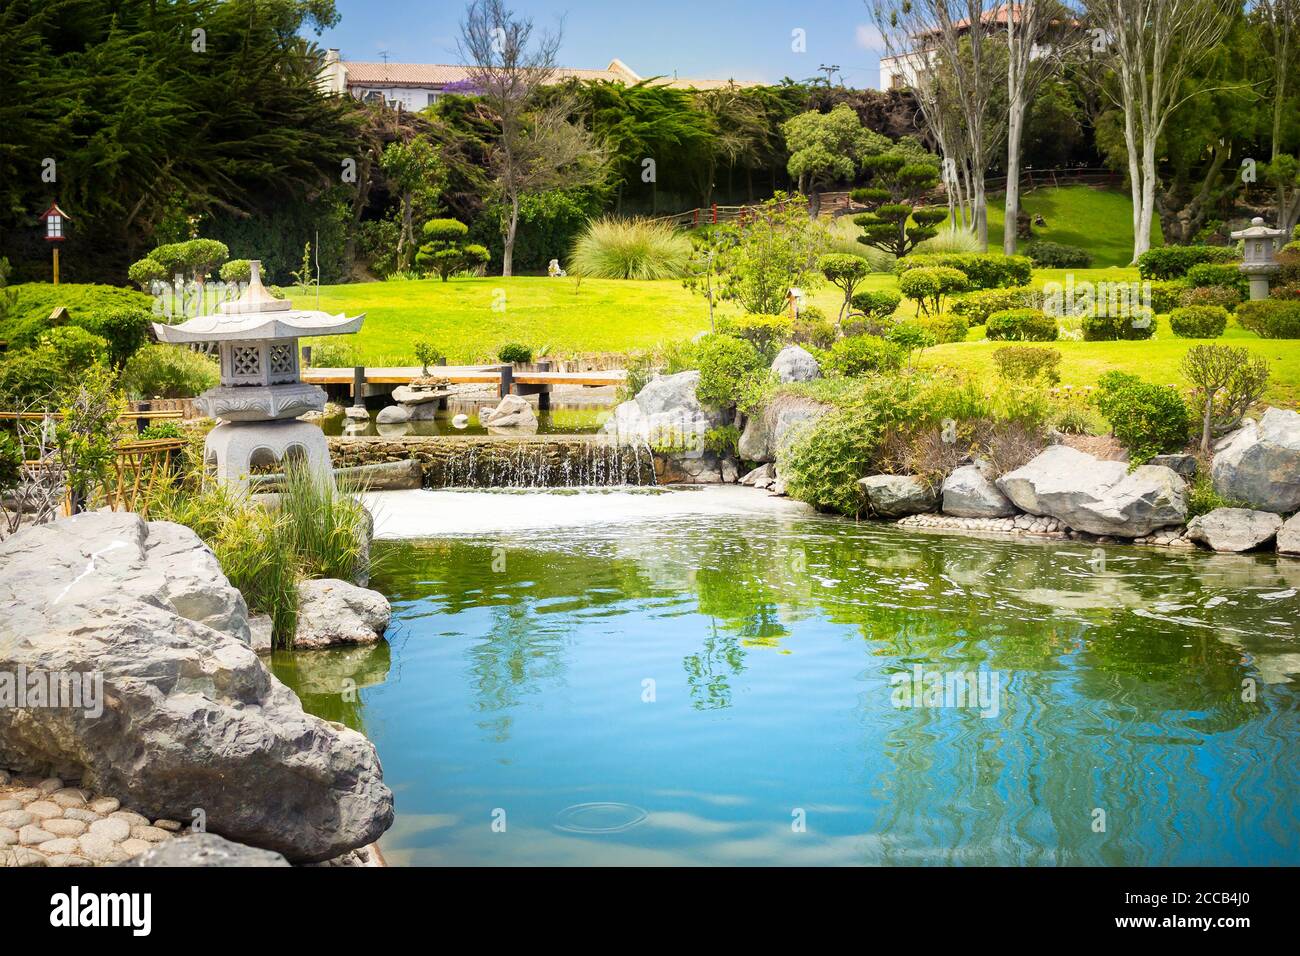 Japanese garden with stone lantern and reflections in the pond in La Serena, Chile Stock Photo